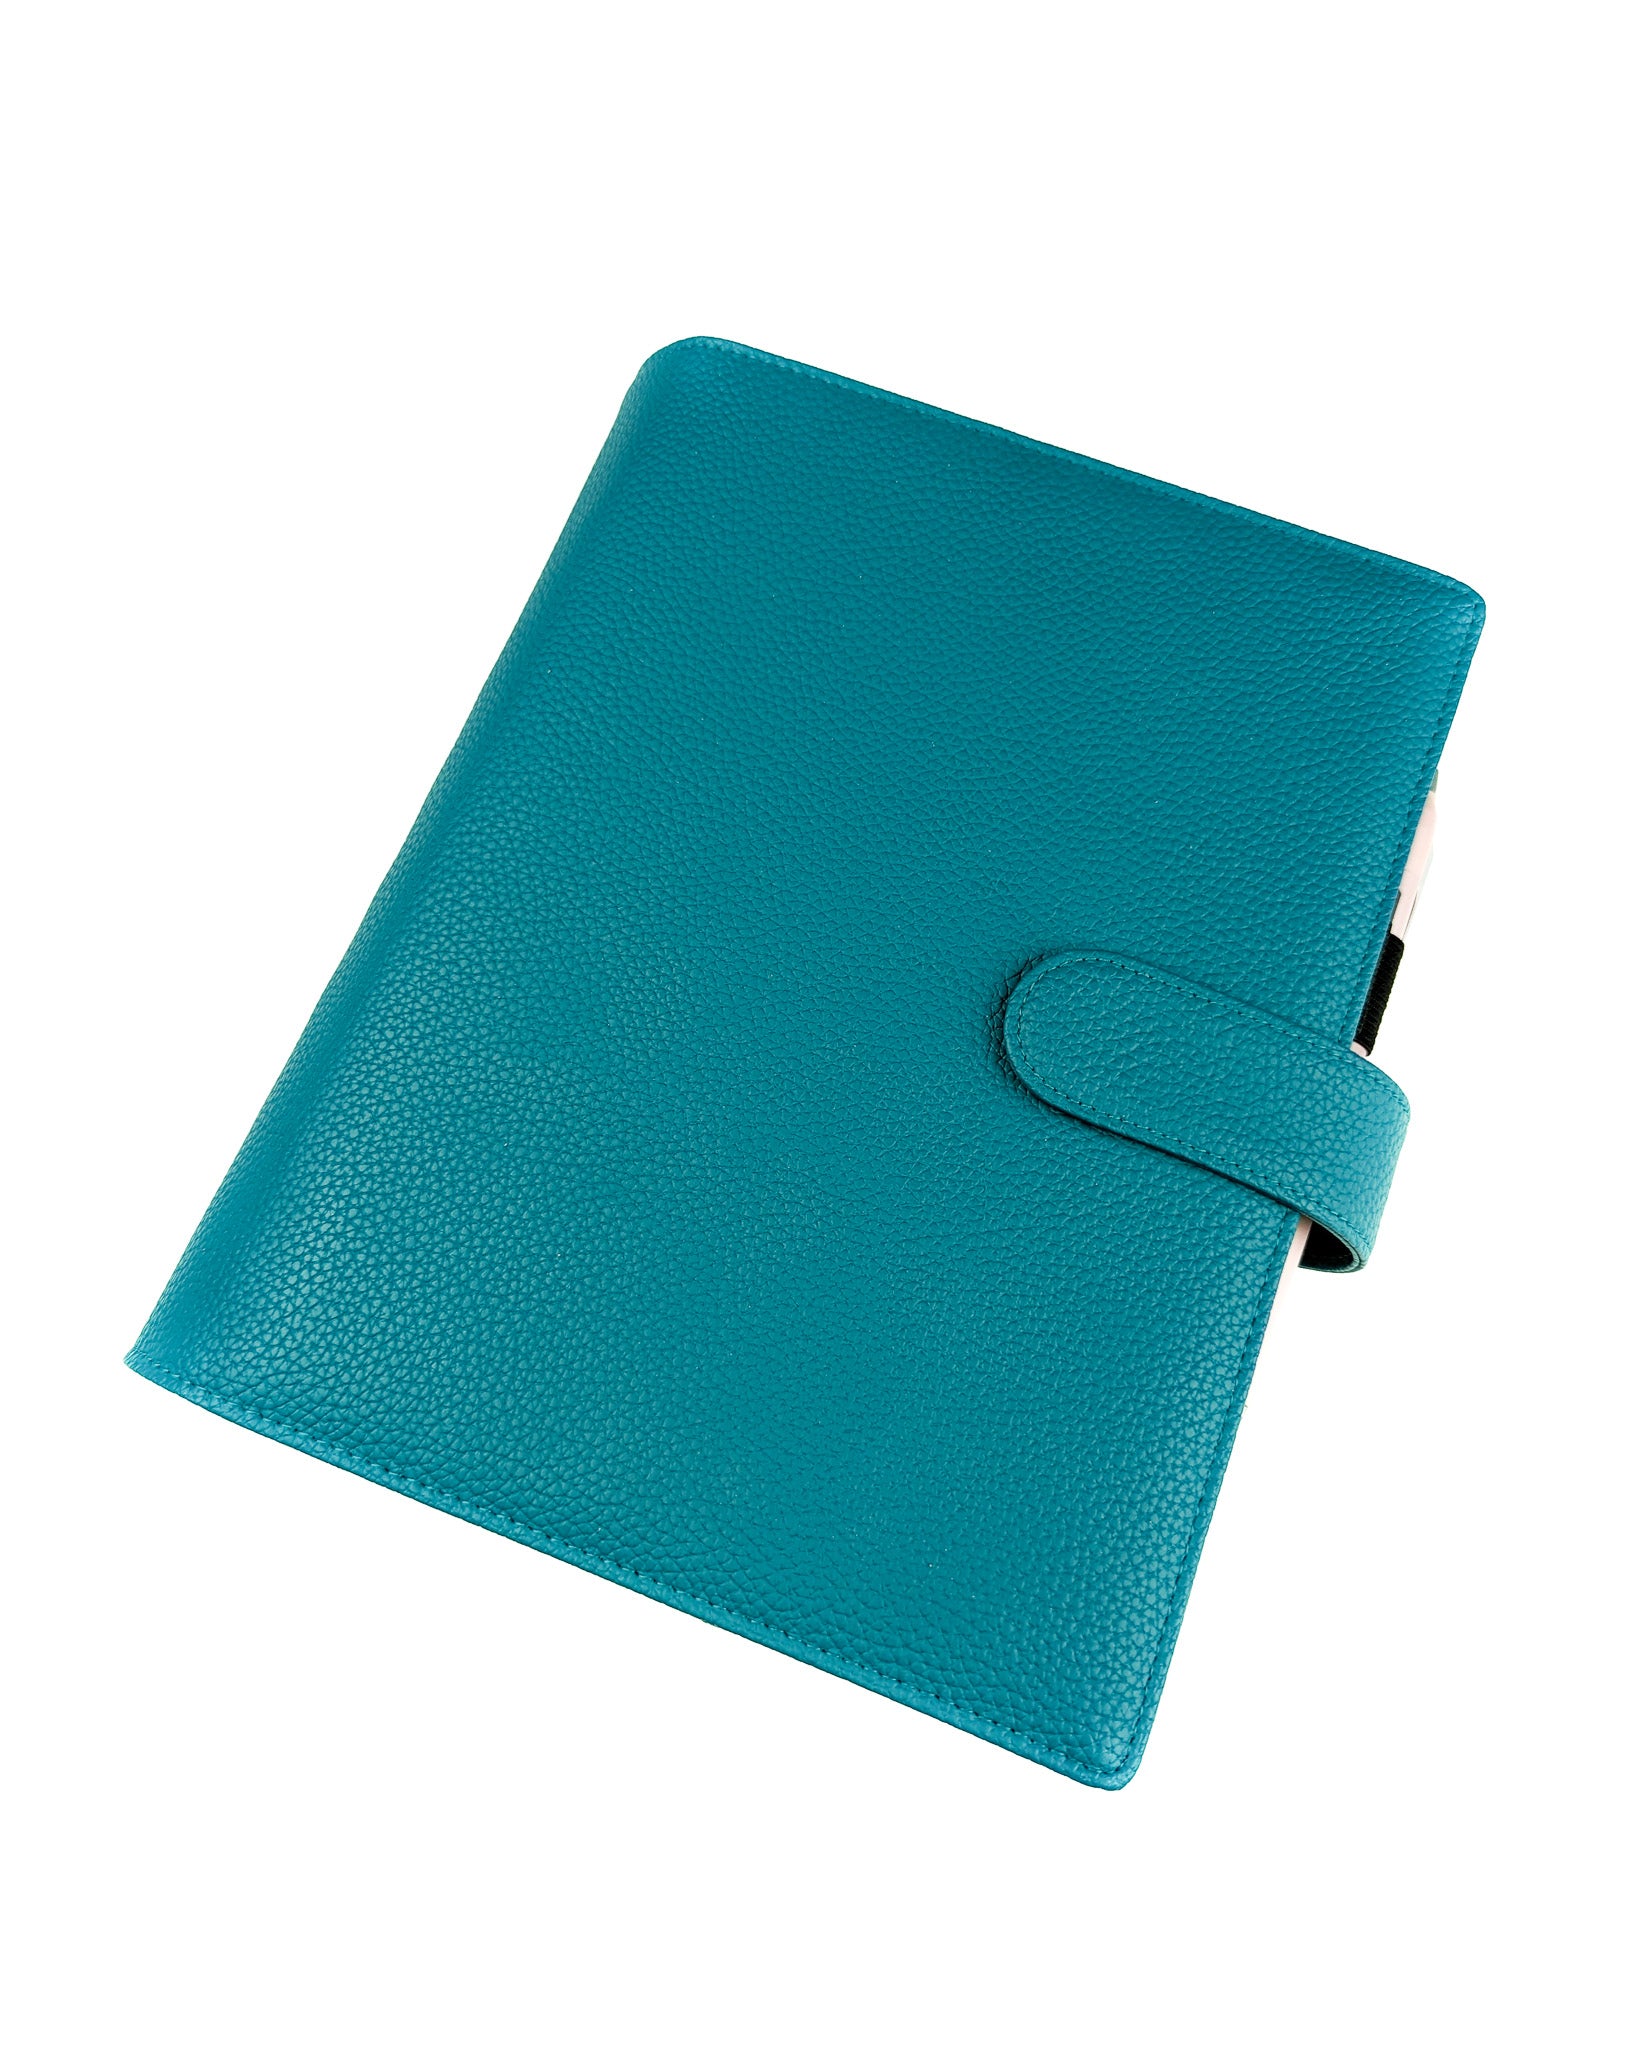 Vegan Leather Discbound Planner Covers by Janes Agenda